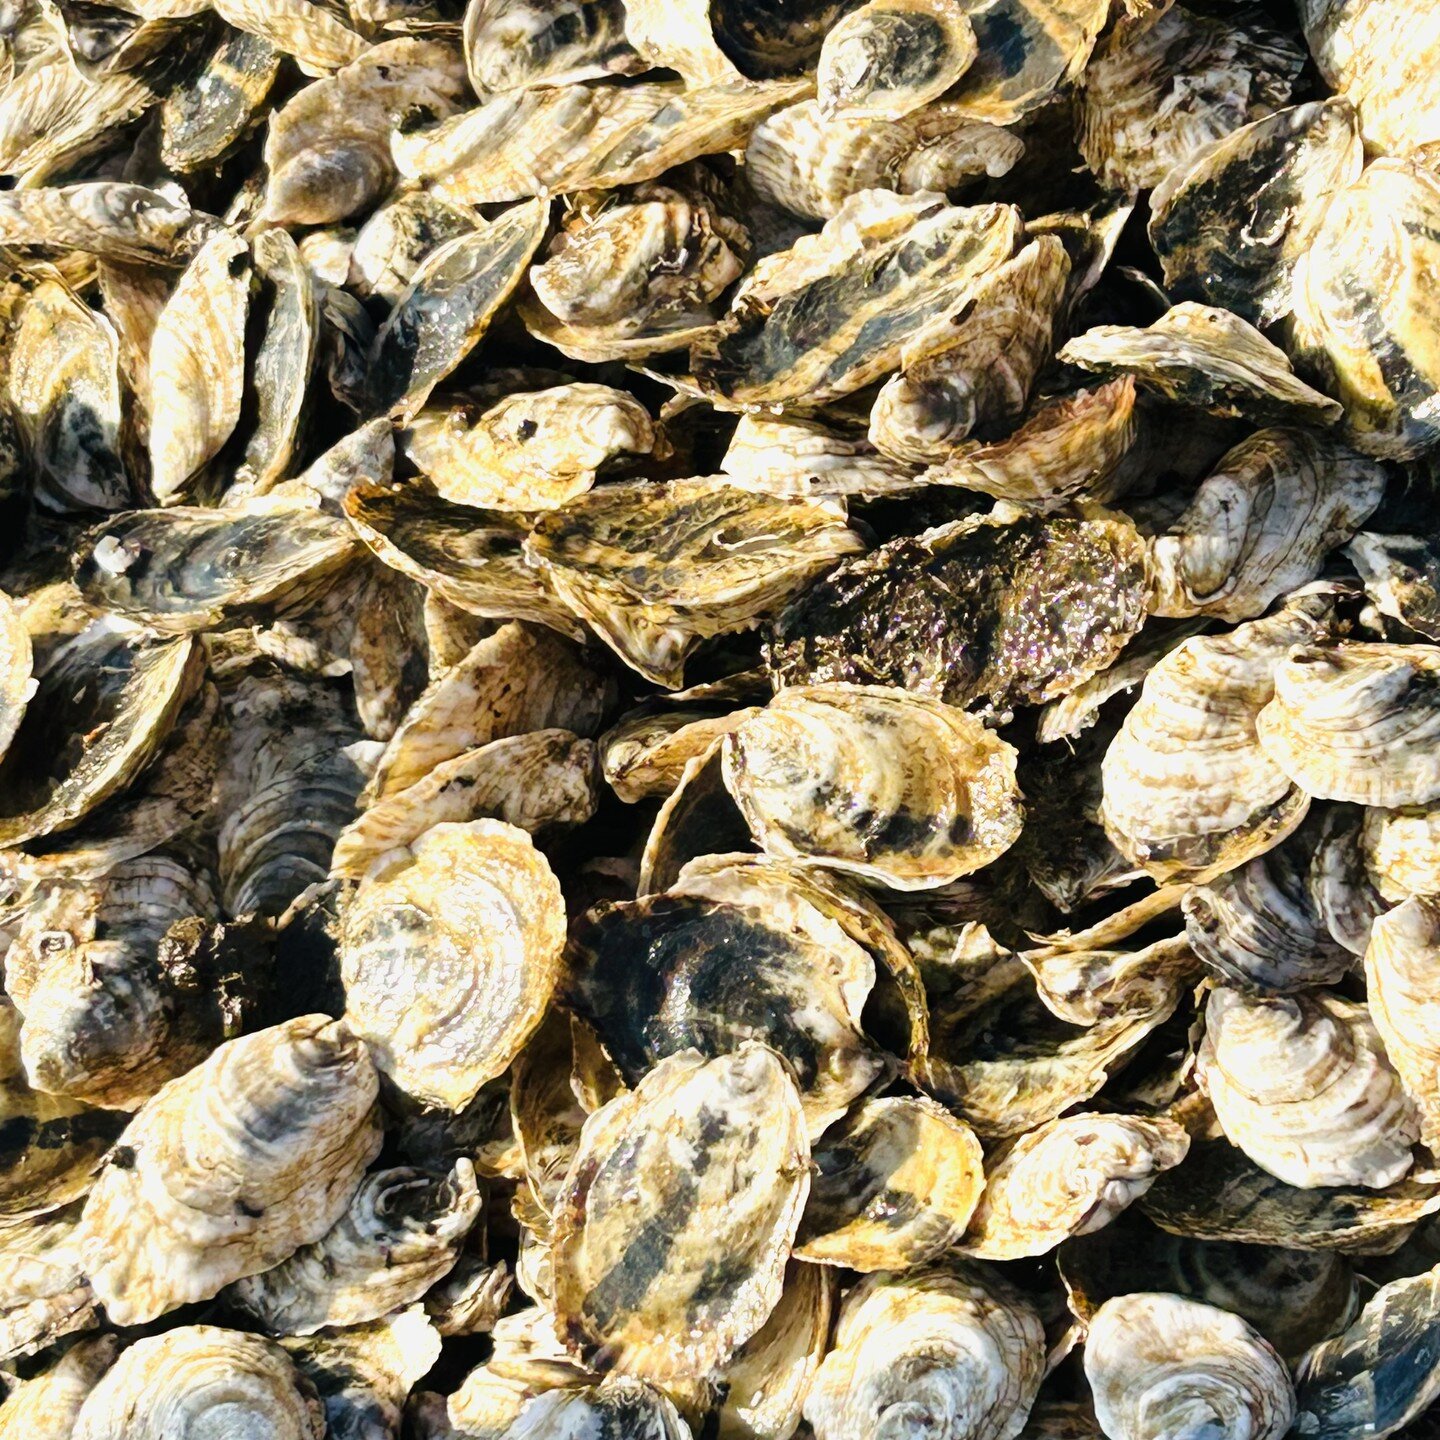 7am last week, the FoBB water operations team went out on the Bay for the last planting of the season. We transported 60,000 Aeros Cultured oysters from the nursery garden cages to the Bay bottom in the Town&rsquo;s sanctuary.
These oysters started o